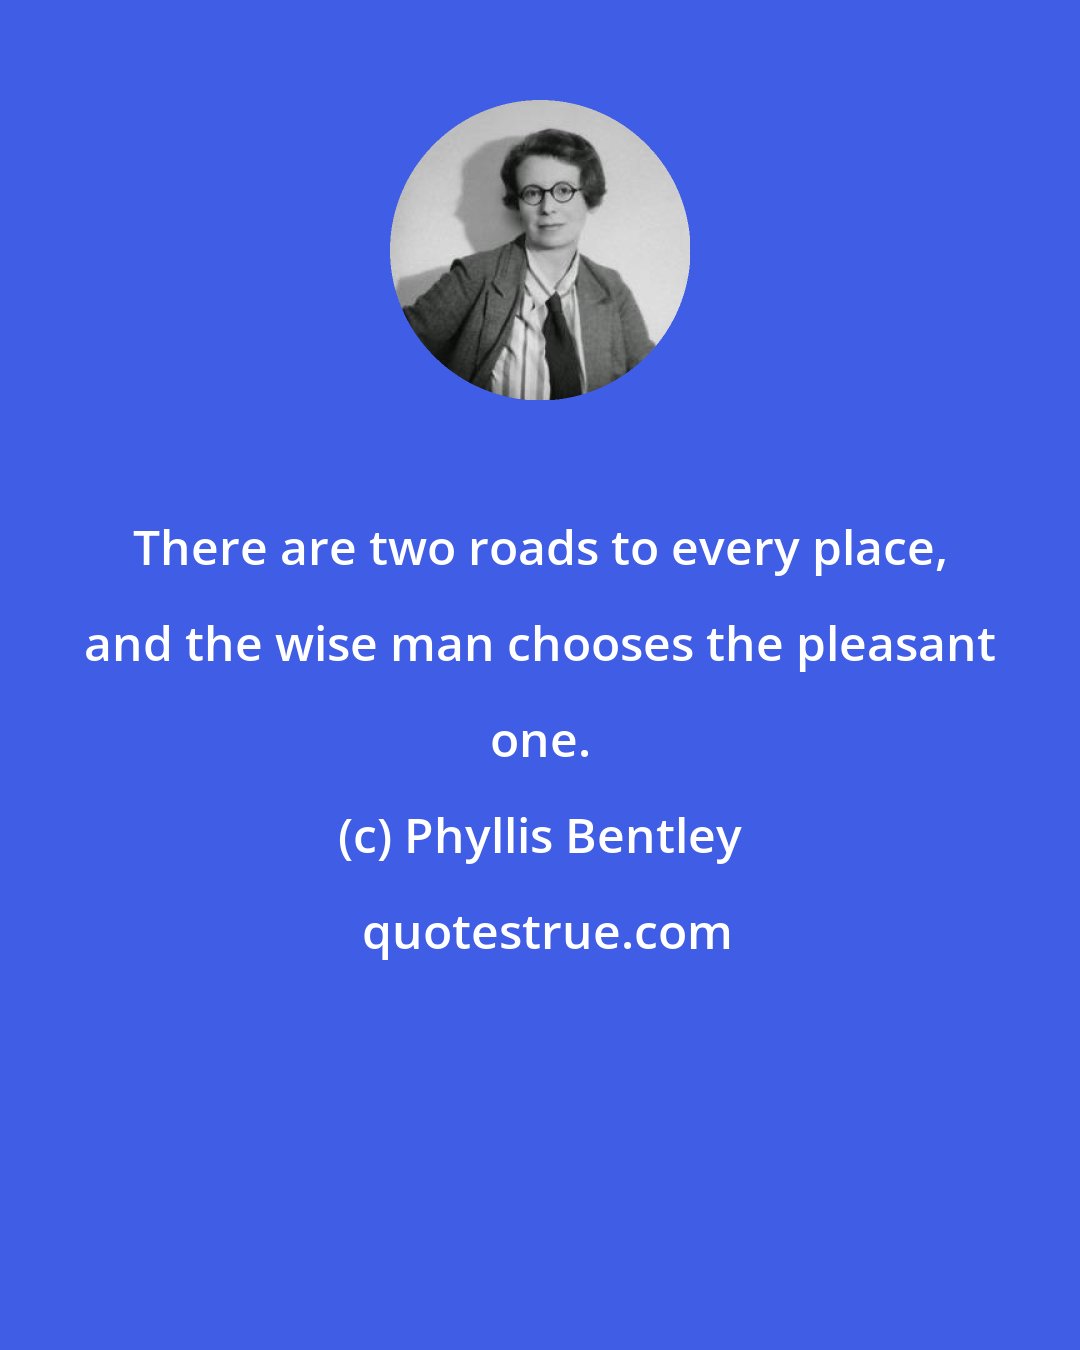 Phyllis Bentley: There are two roads to every place, and the wise man chooses the pleasant one.